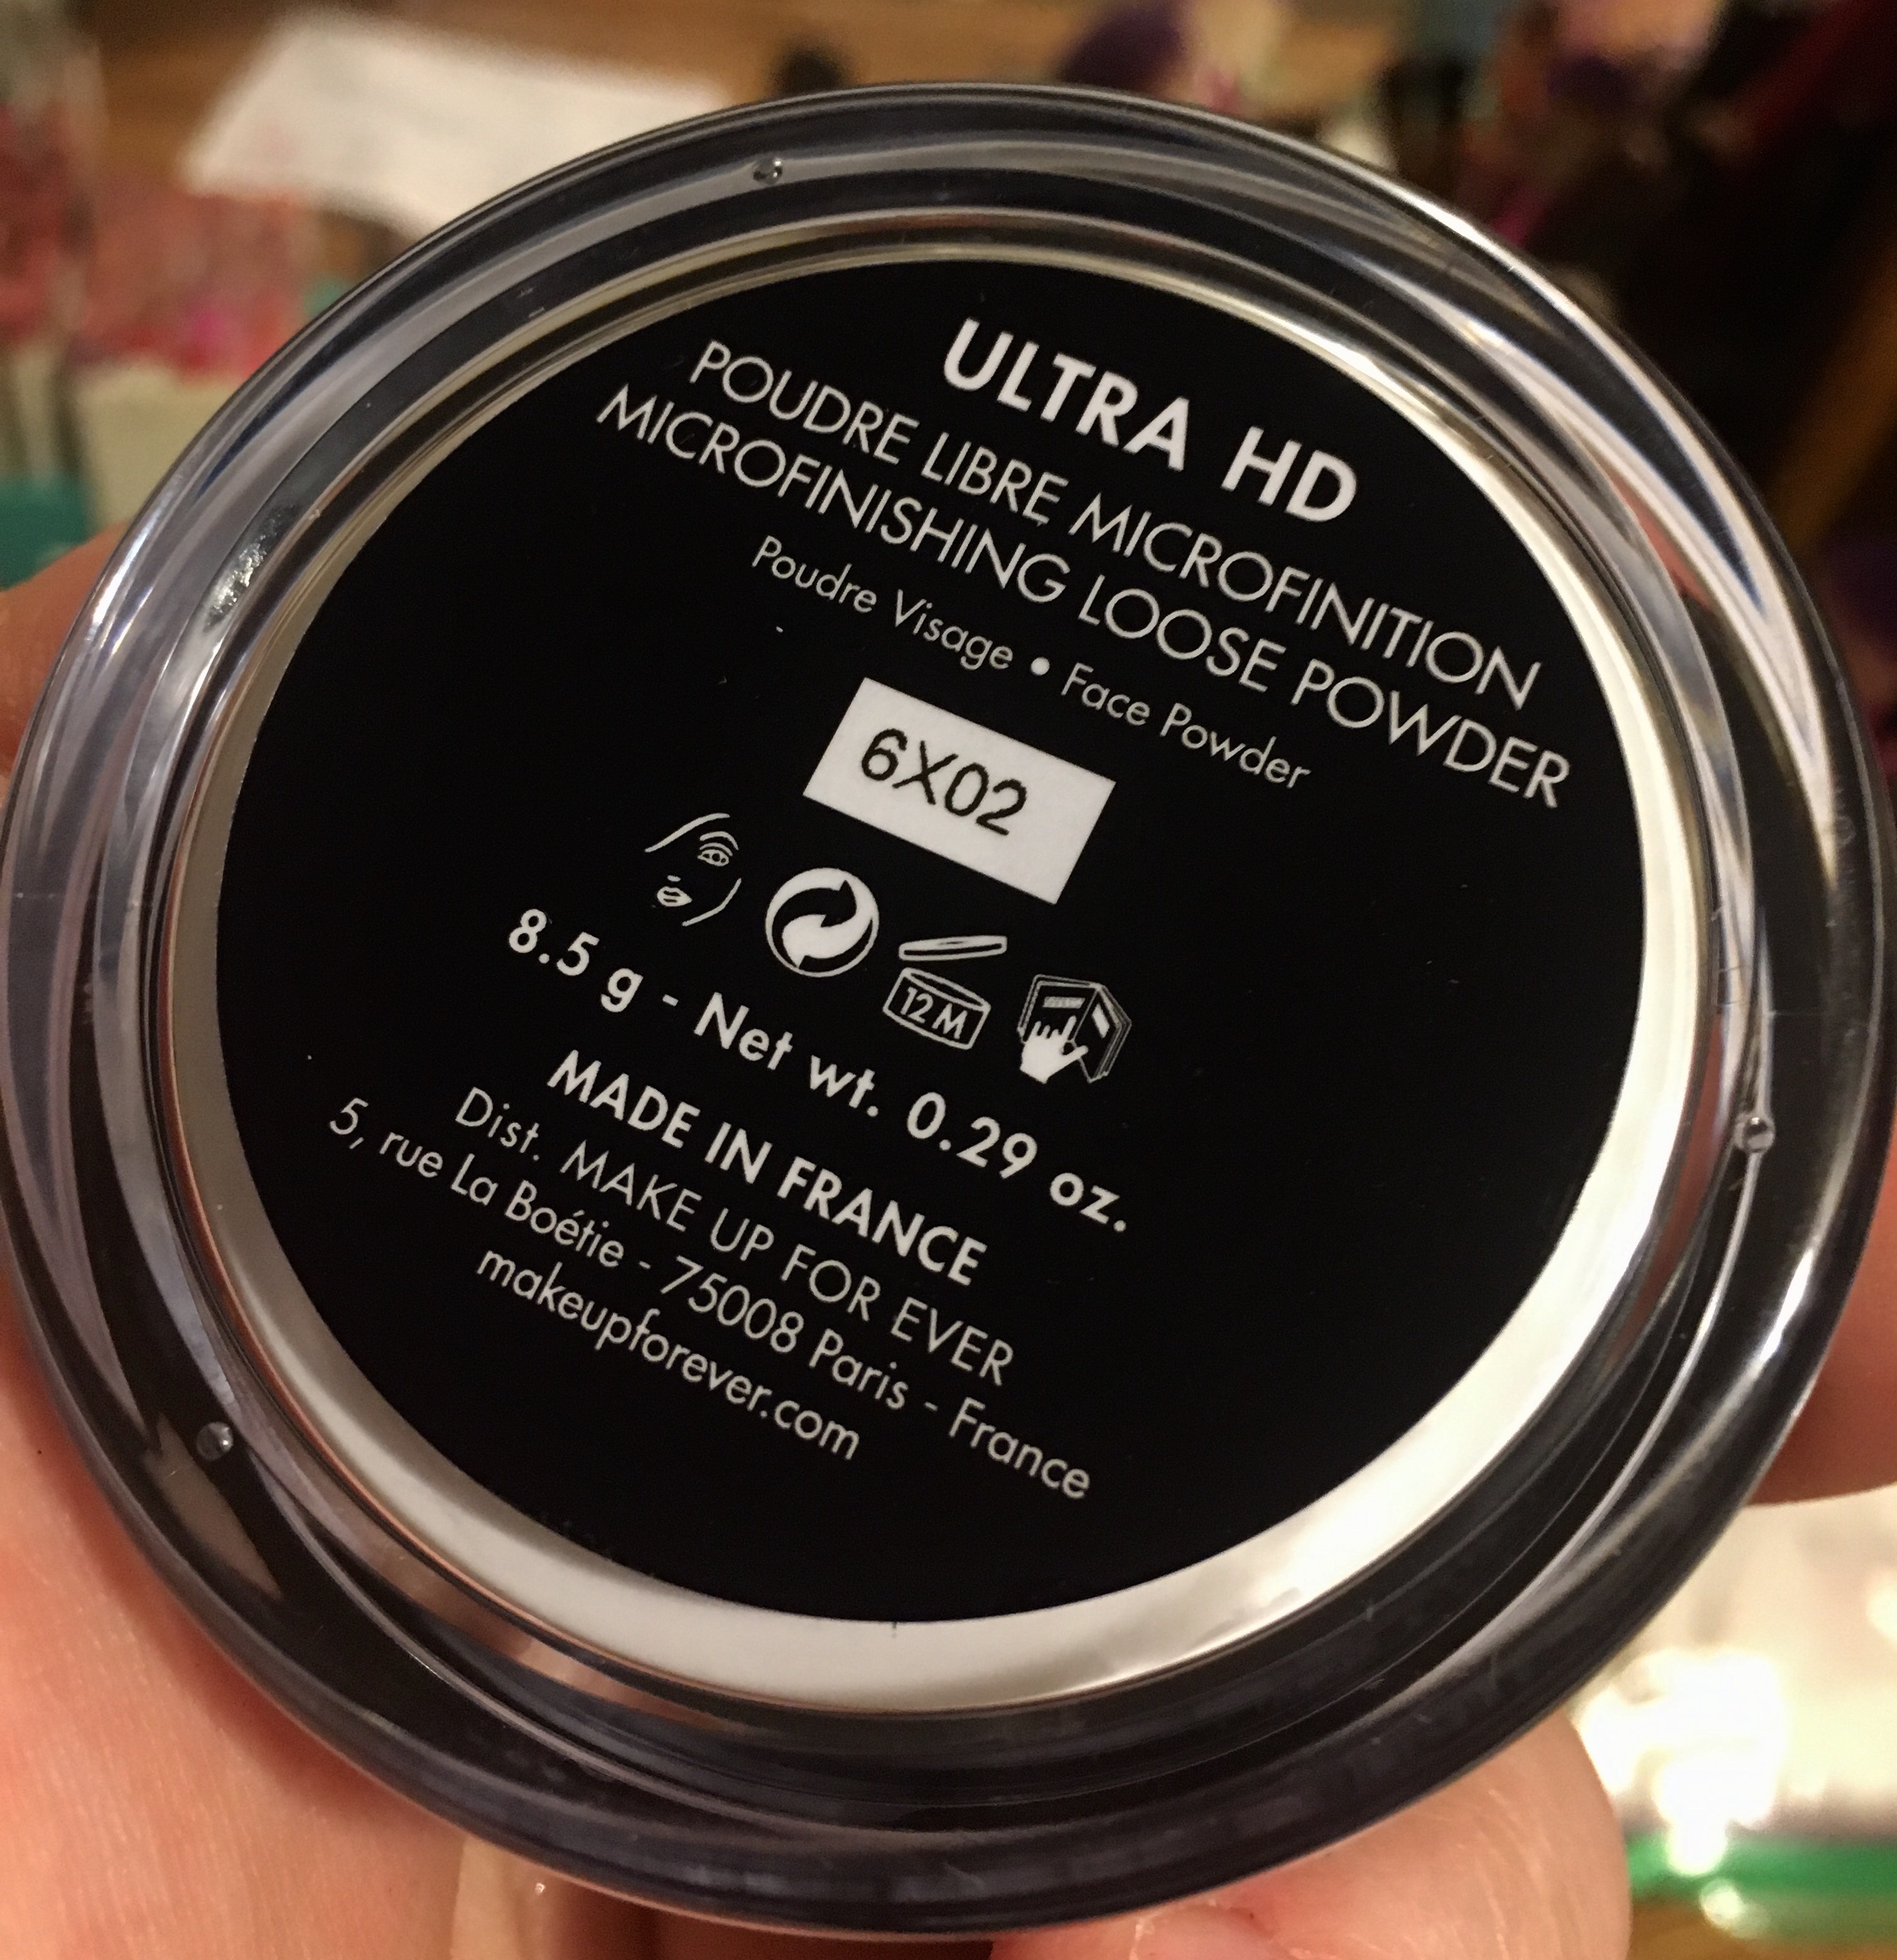 Make Up For Ever Ultra HD Microfinishing Loose Powder, Lip Booster